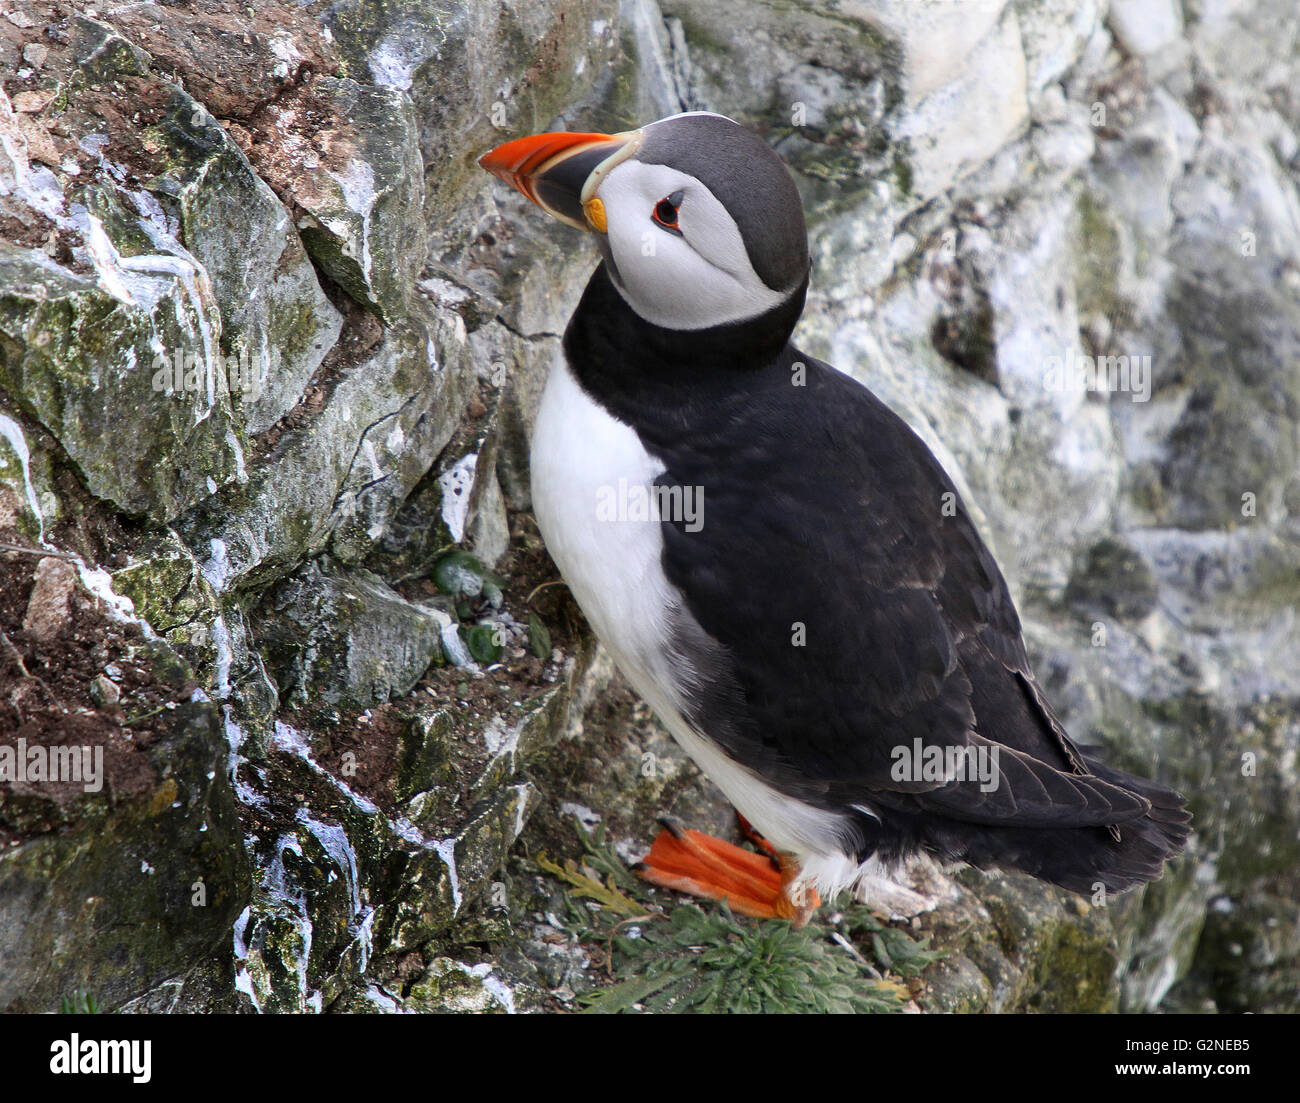 Puffins are any of three small species of alcids (auks) in the bird genus Fratercula with a brightly colored beak during the br Stock Photo